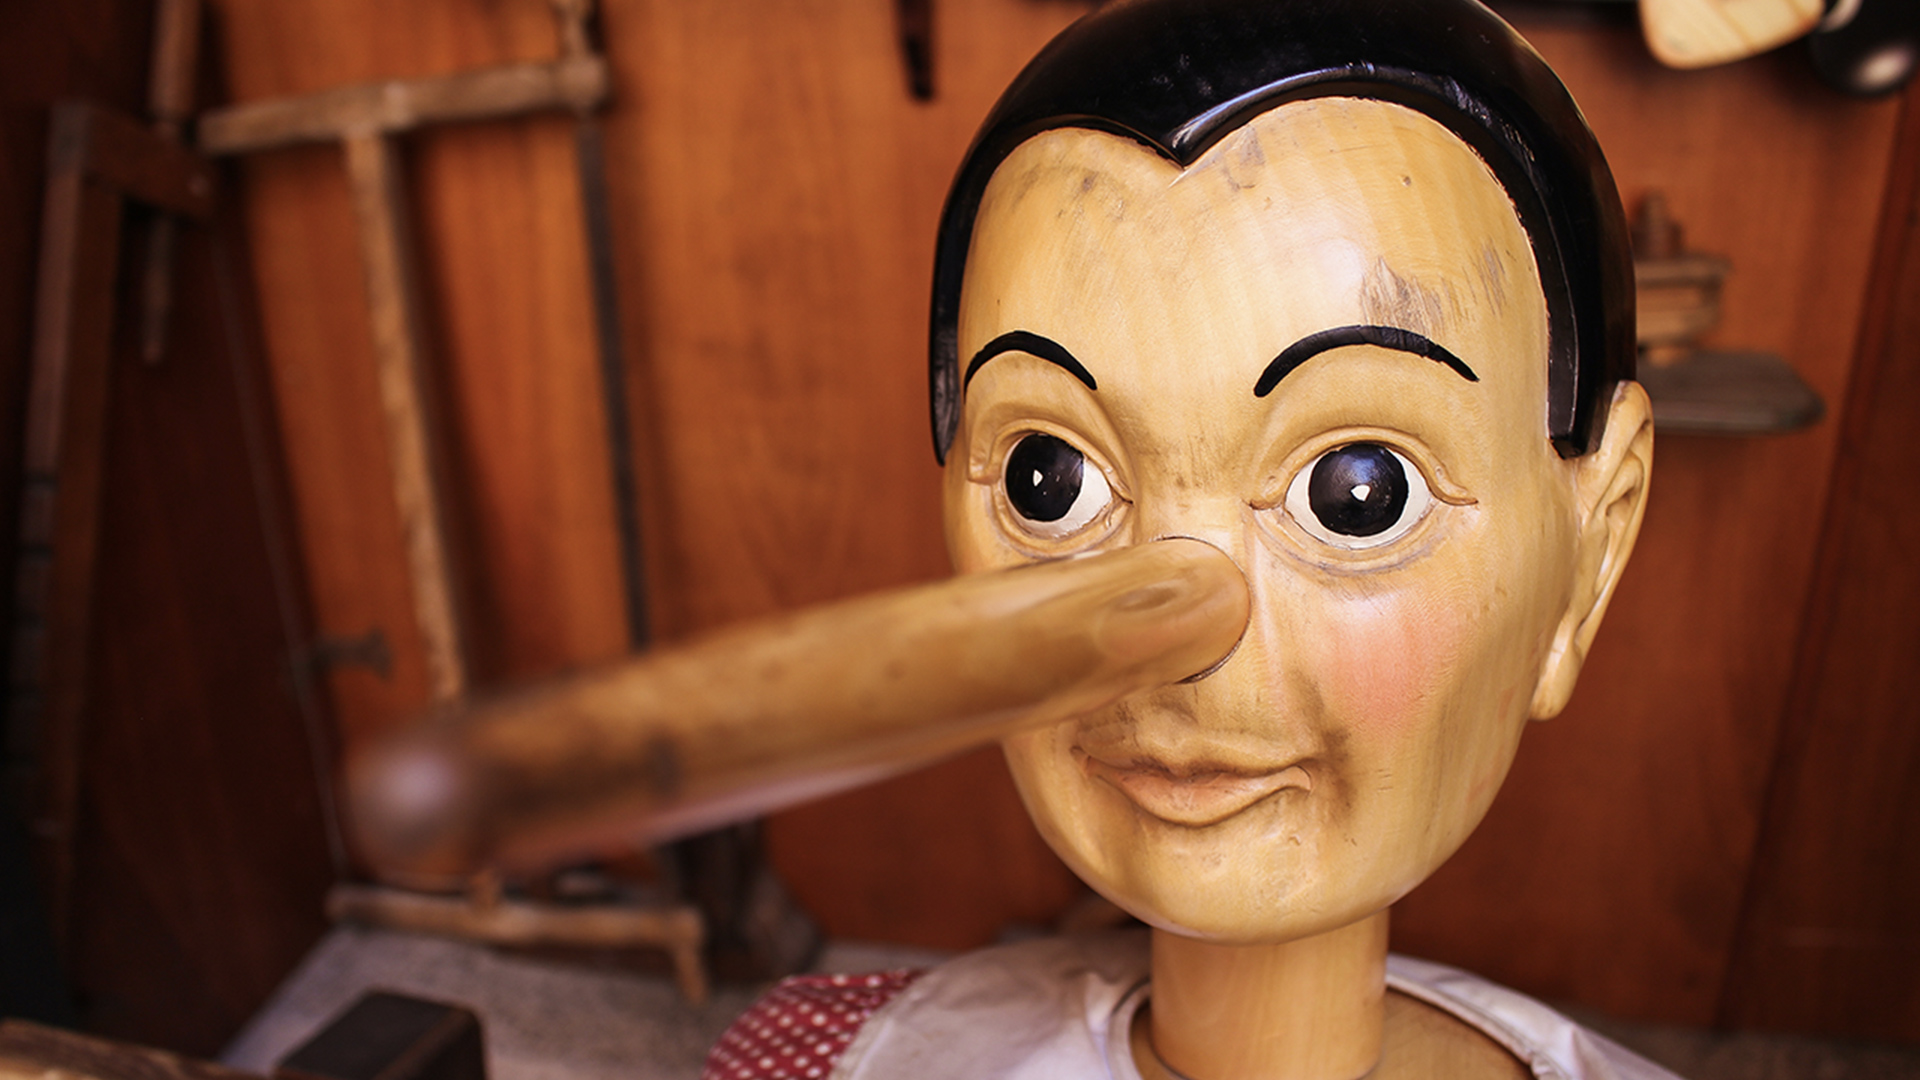 Pinocchio with an extended nose